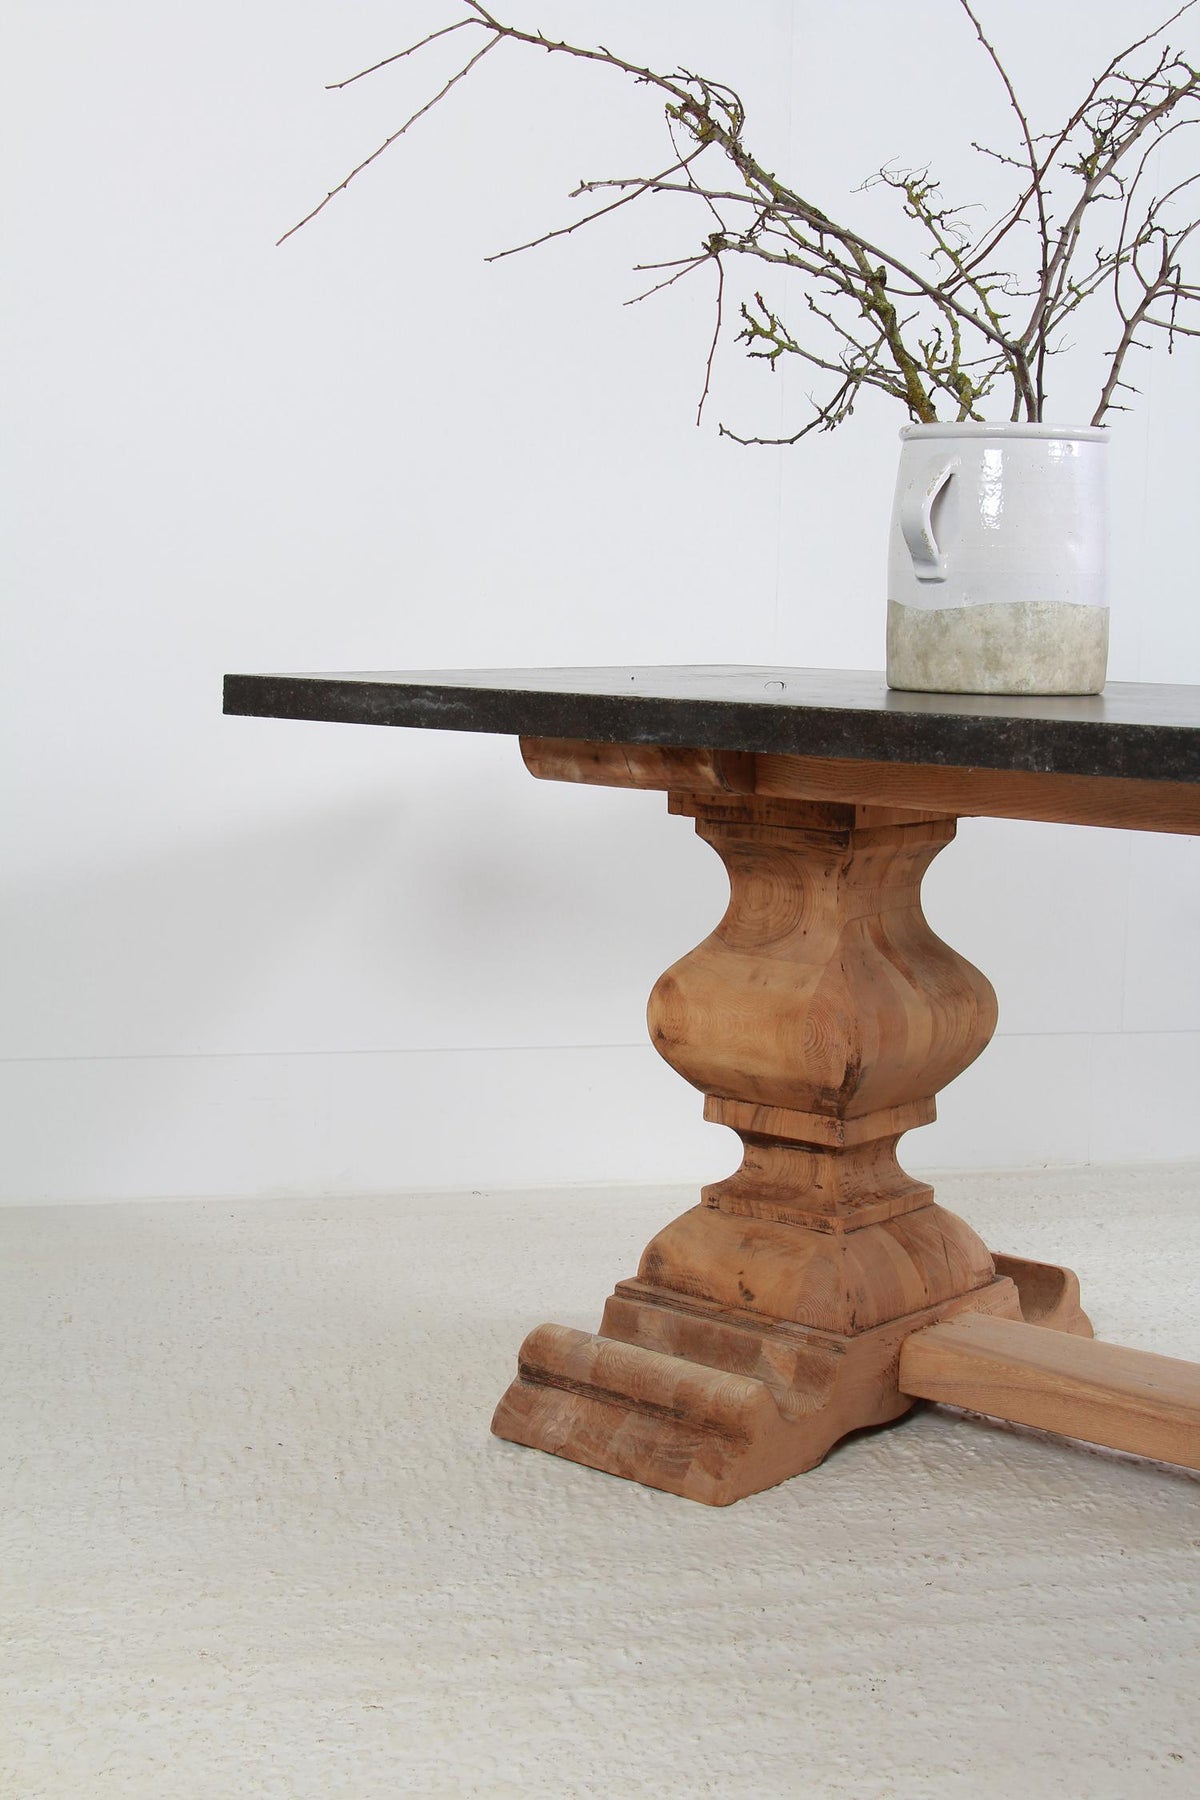 Magnificent Belgian Bluestone and Oak Dining Table